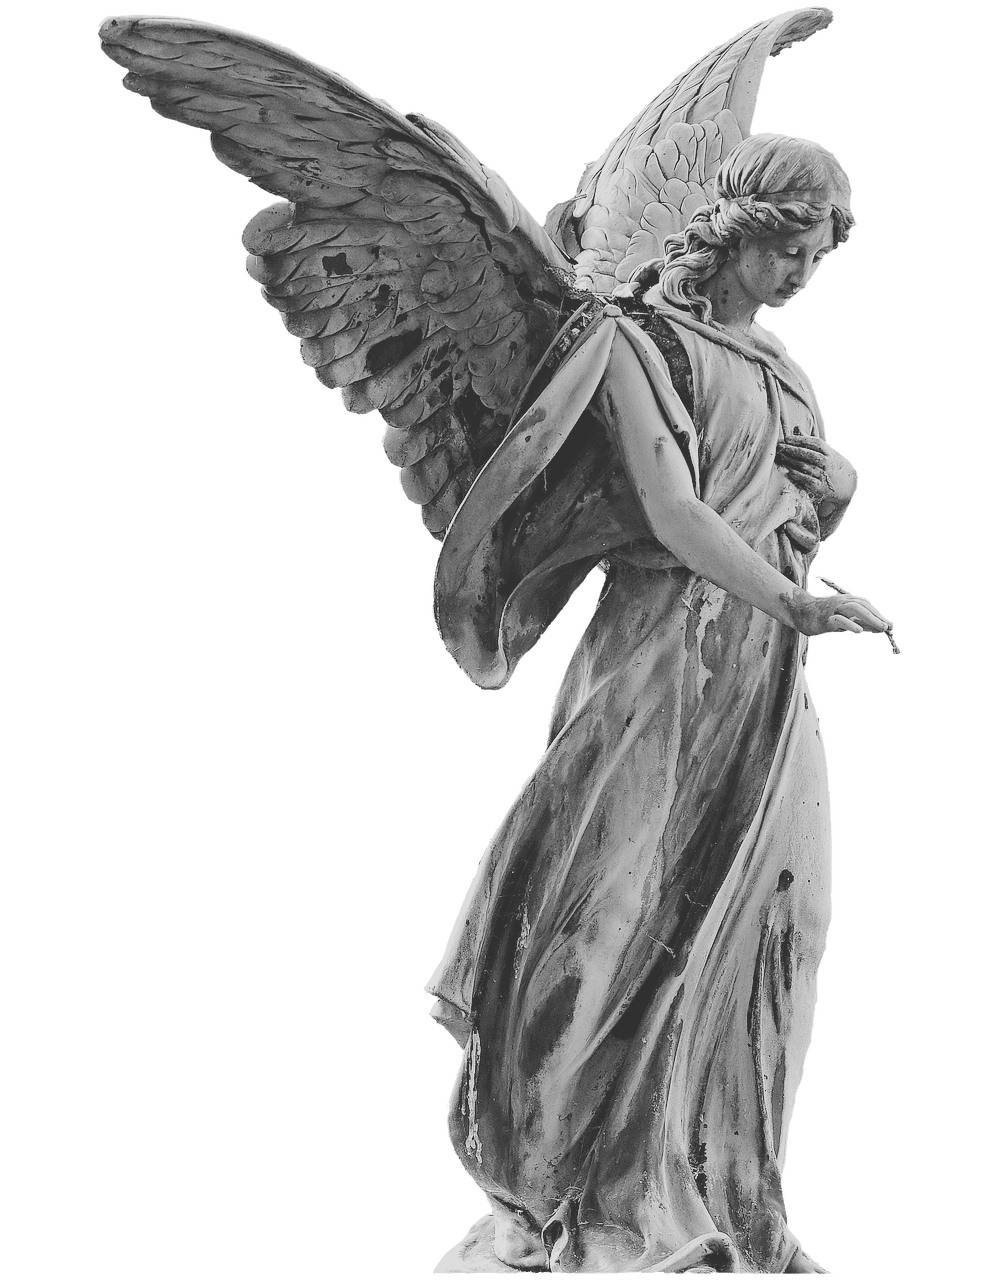 Angel 6 from Pixabay